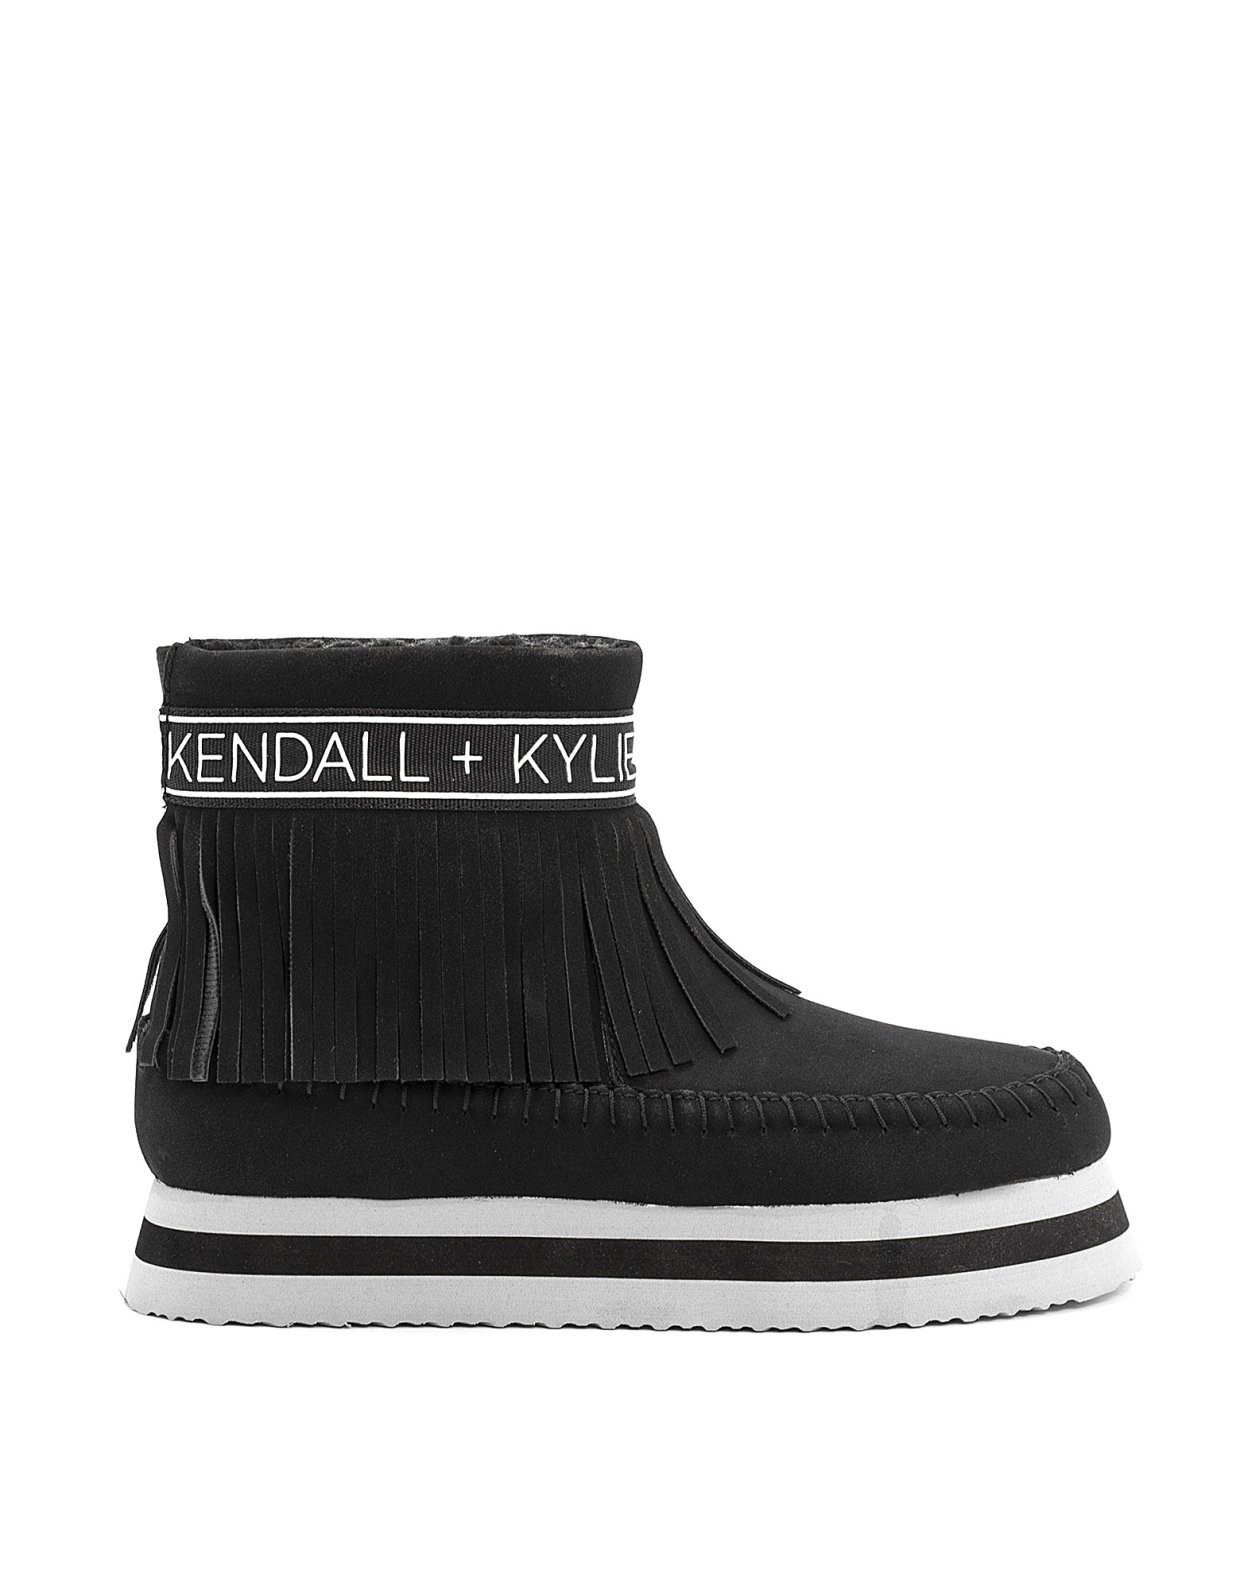 Kendall + Kylie Sirena shoes black